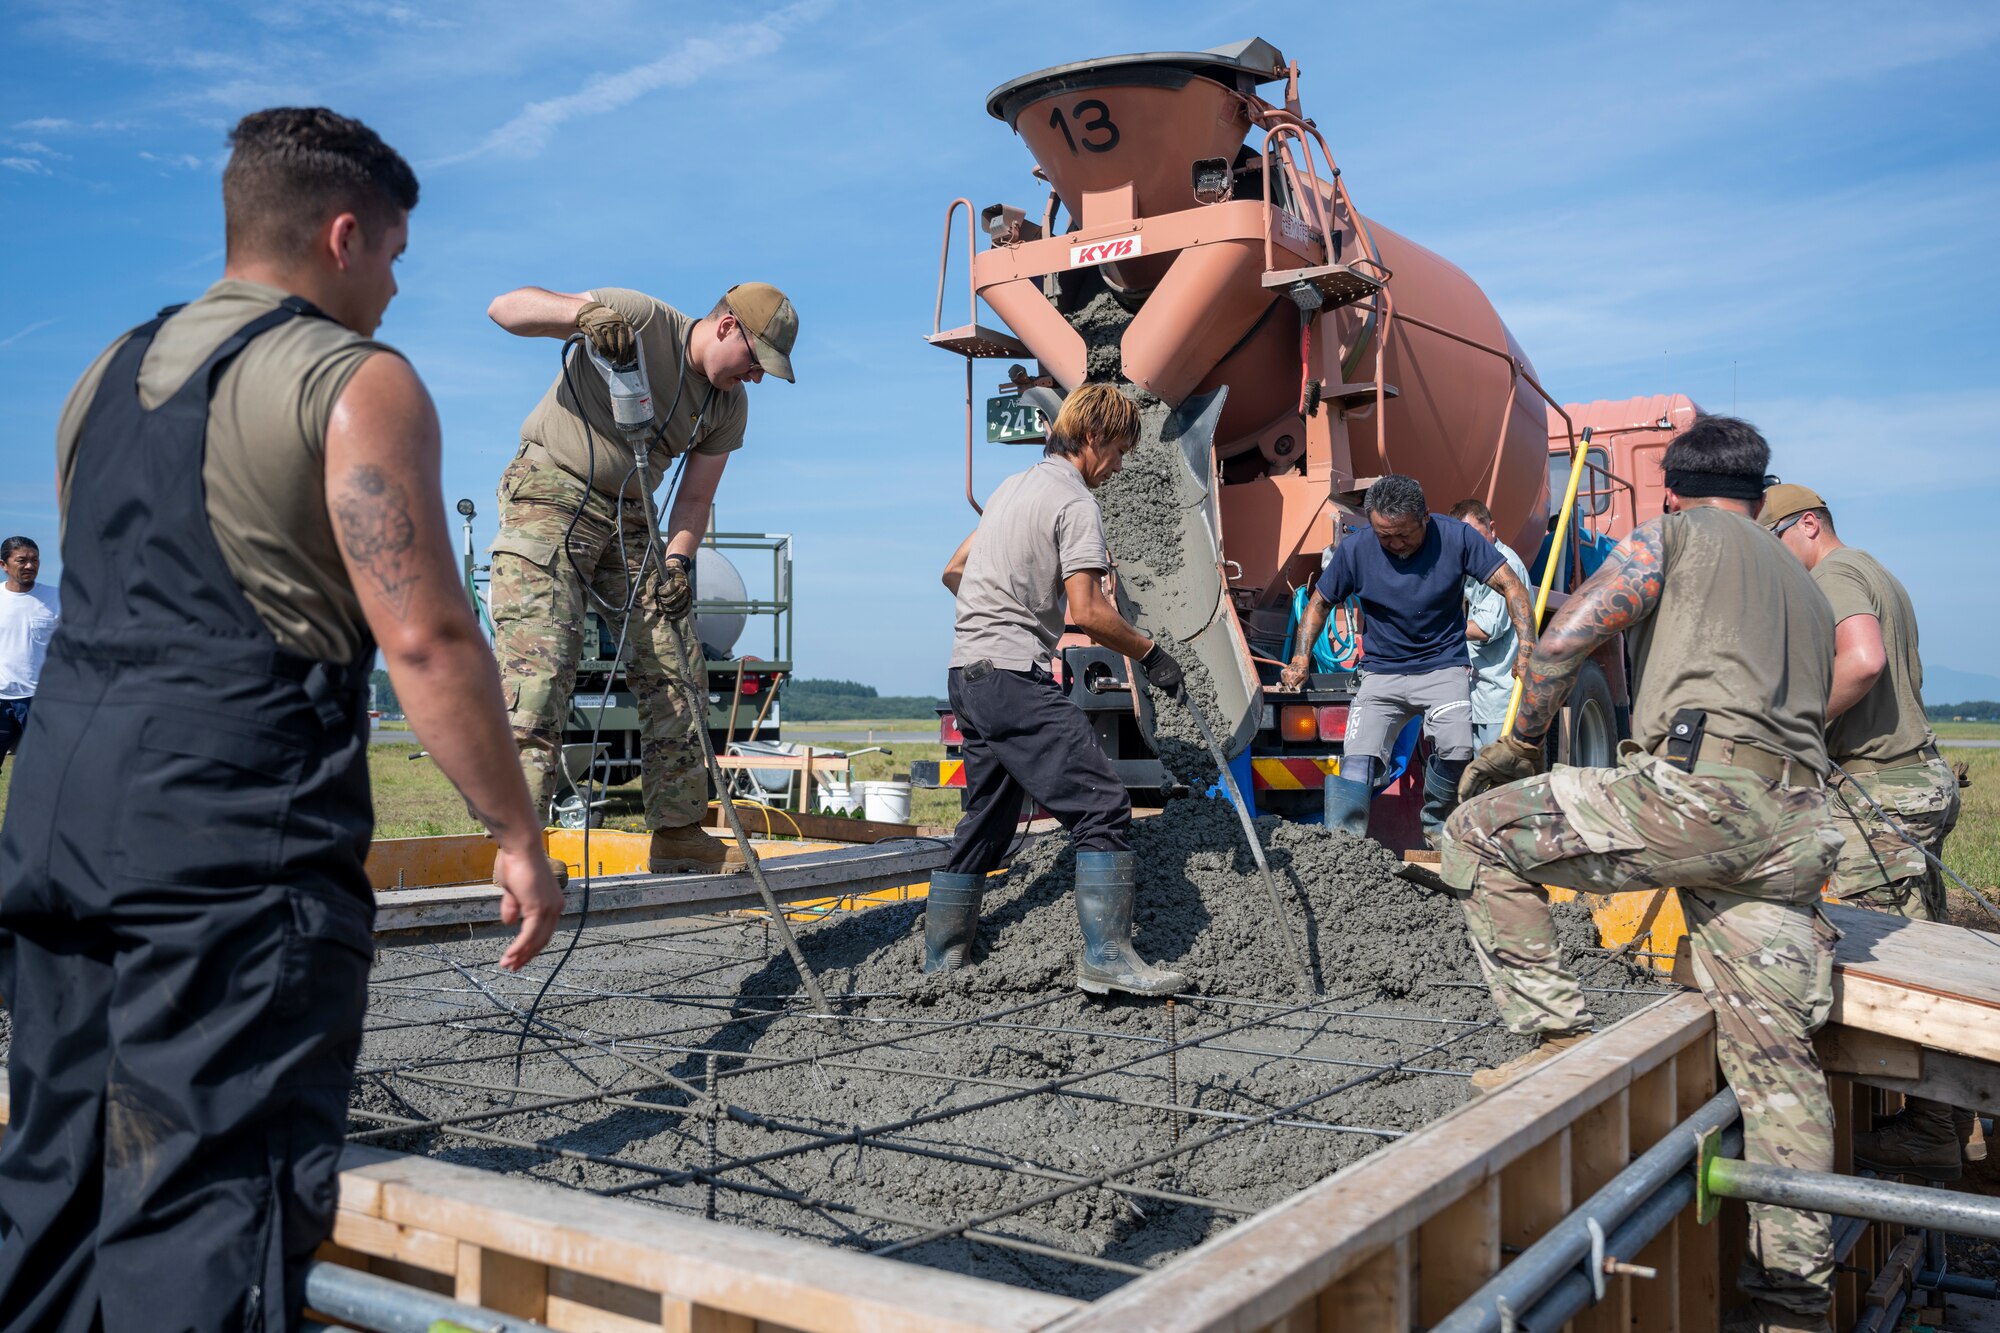 A group of people pouring cement into a frame.